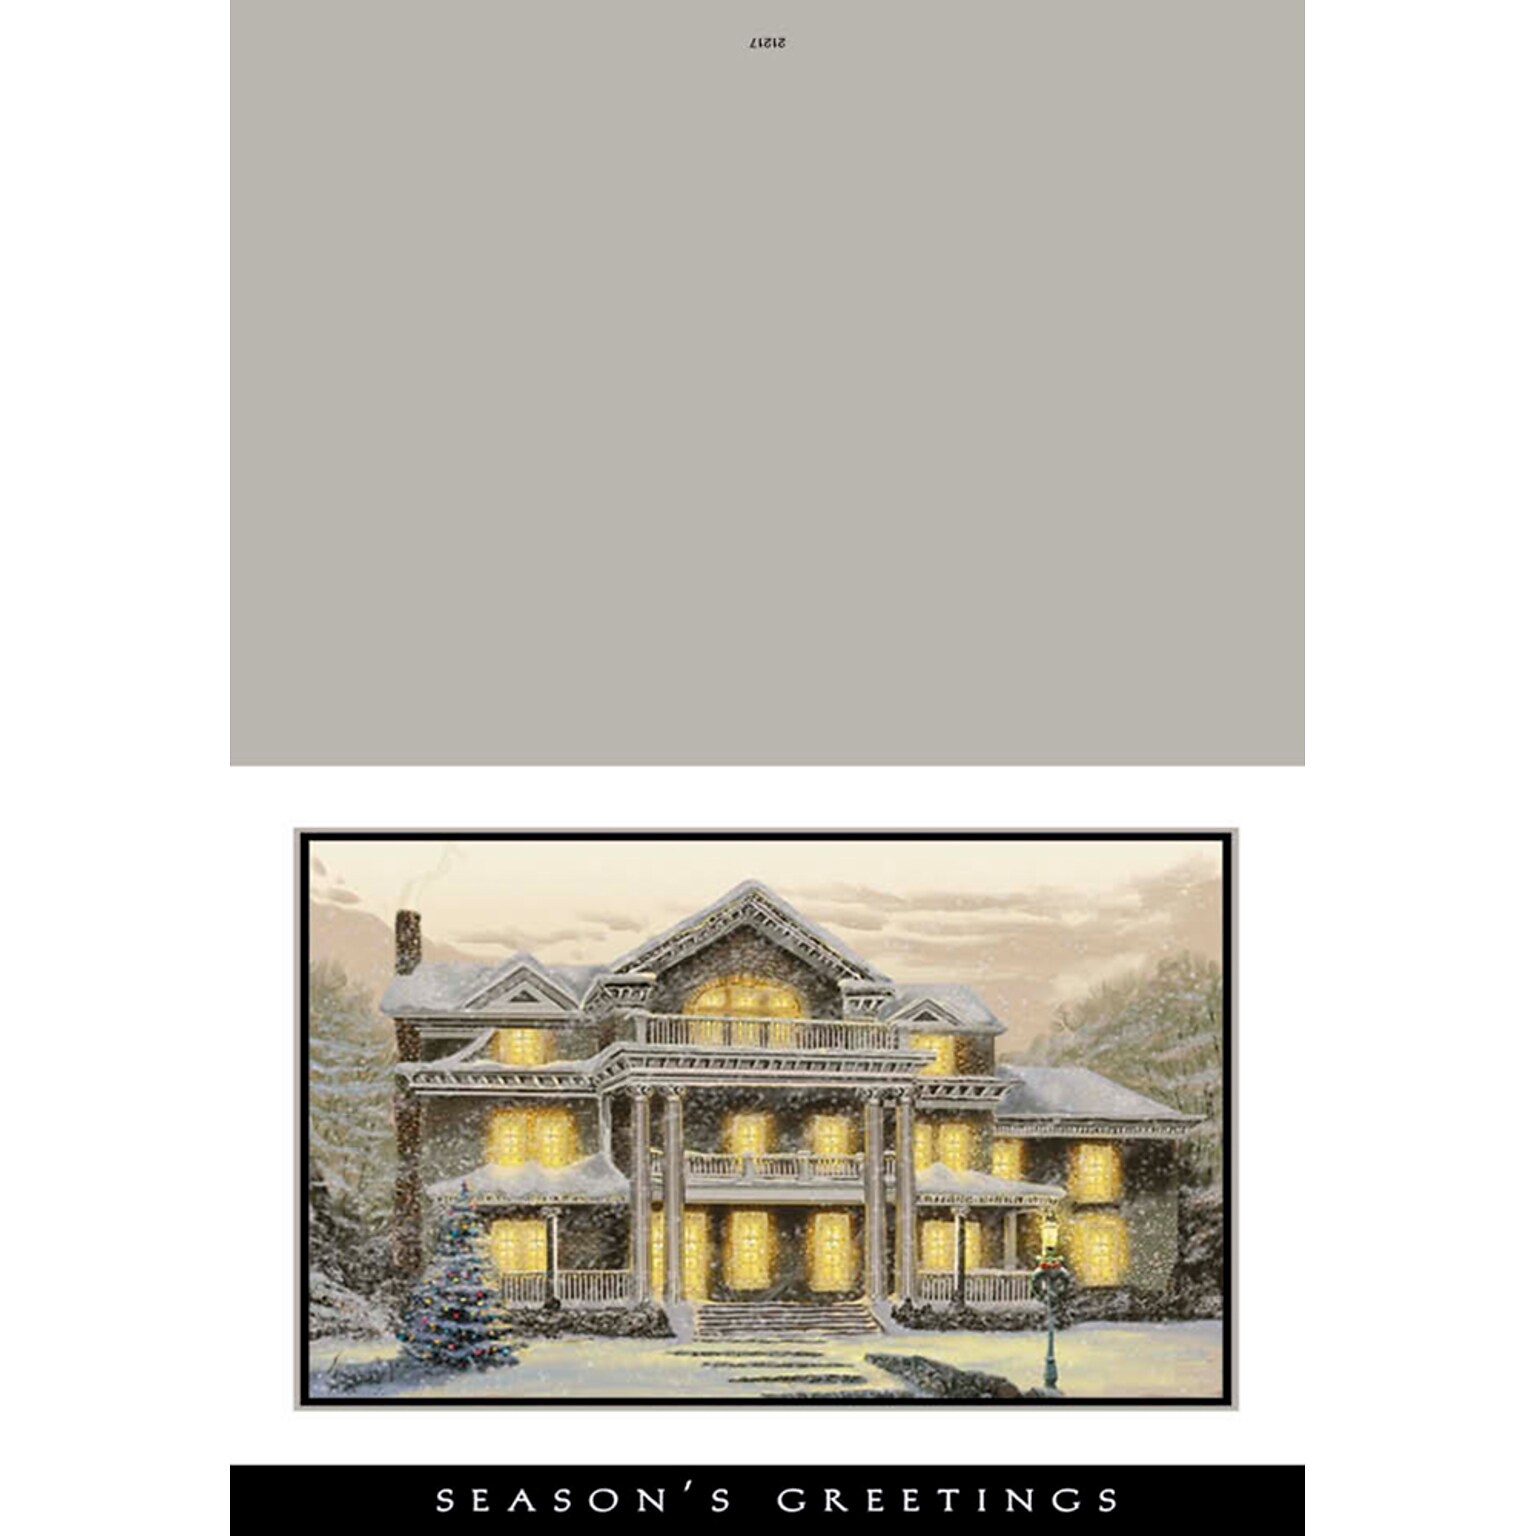 Seasons greetings - old house - 7 x 10 scored for folding to 7 x 5, 25 cards w/A7 envelopes per set